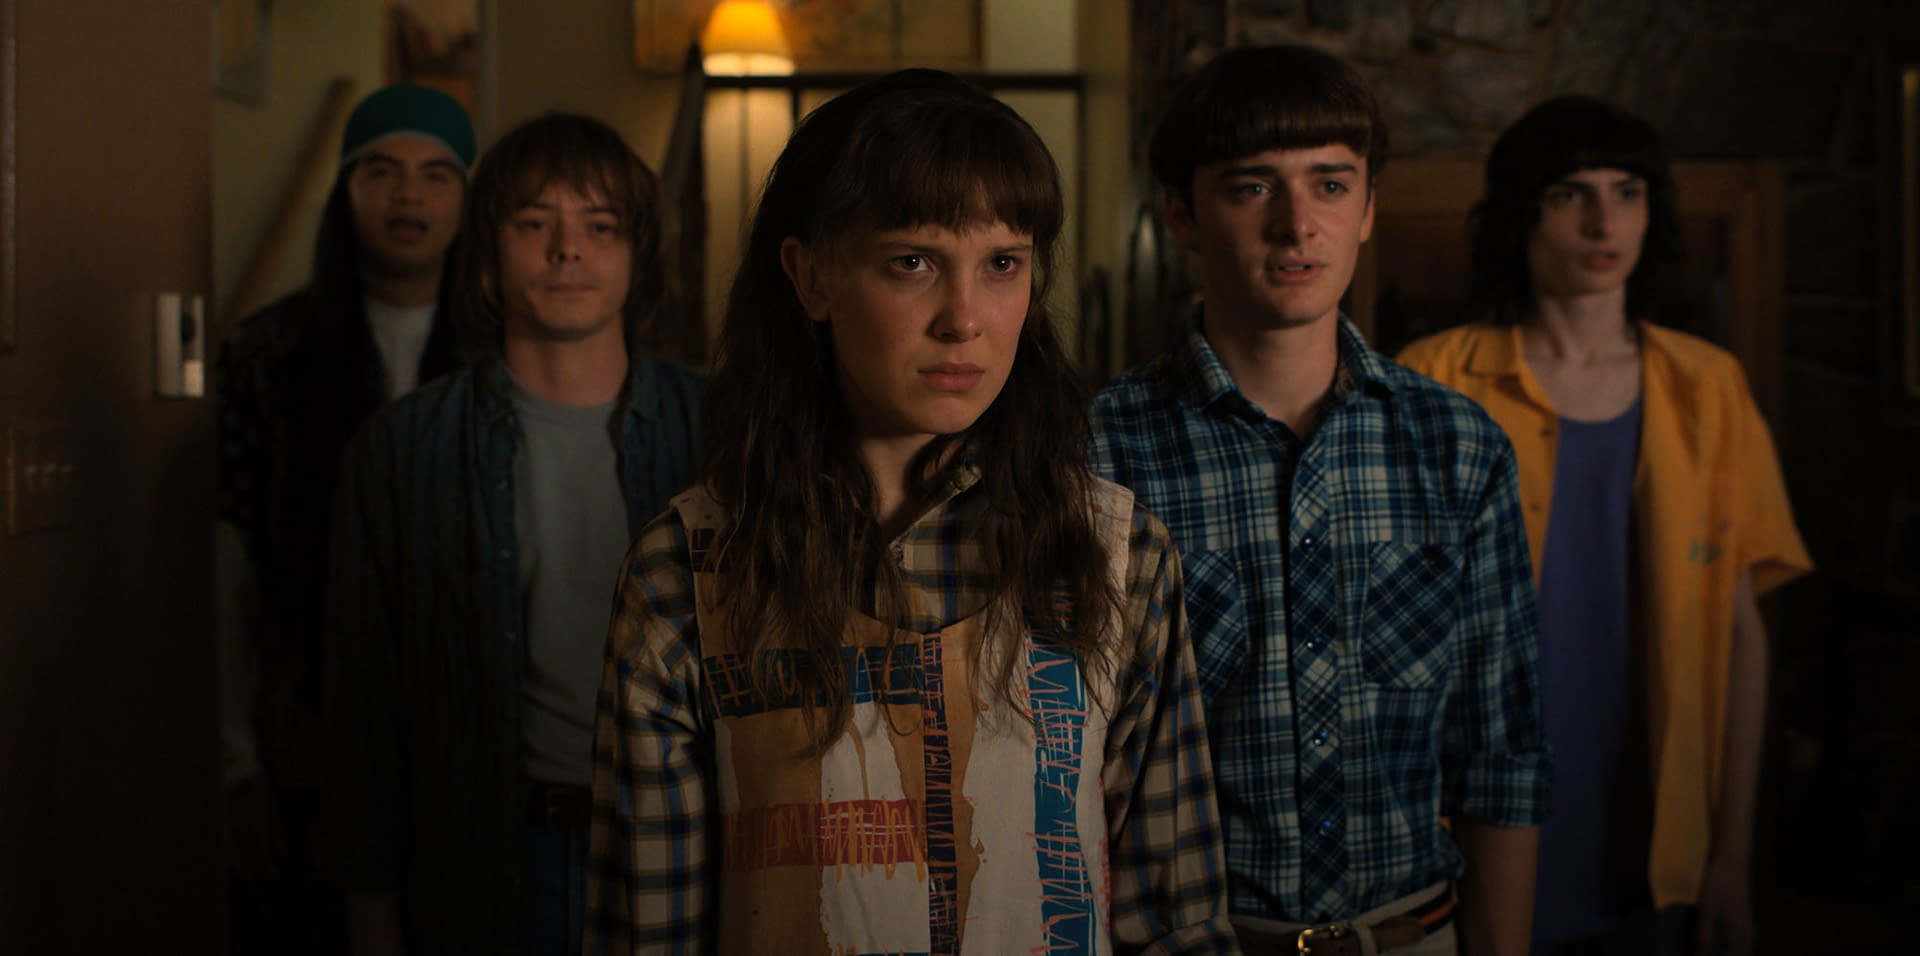 Stranger Things season 4 volume 2 episodes 8 and 9 recap: The Upside Down  is unleashed